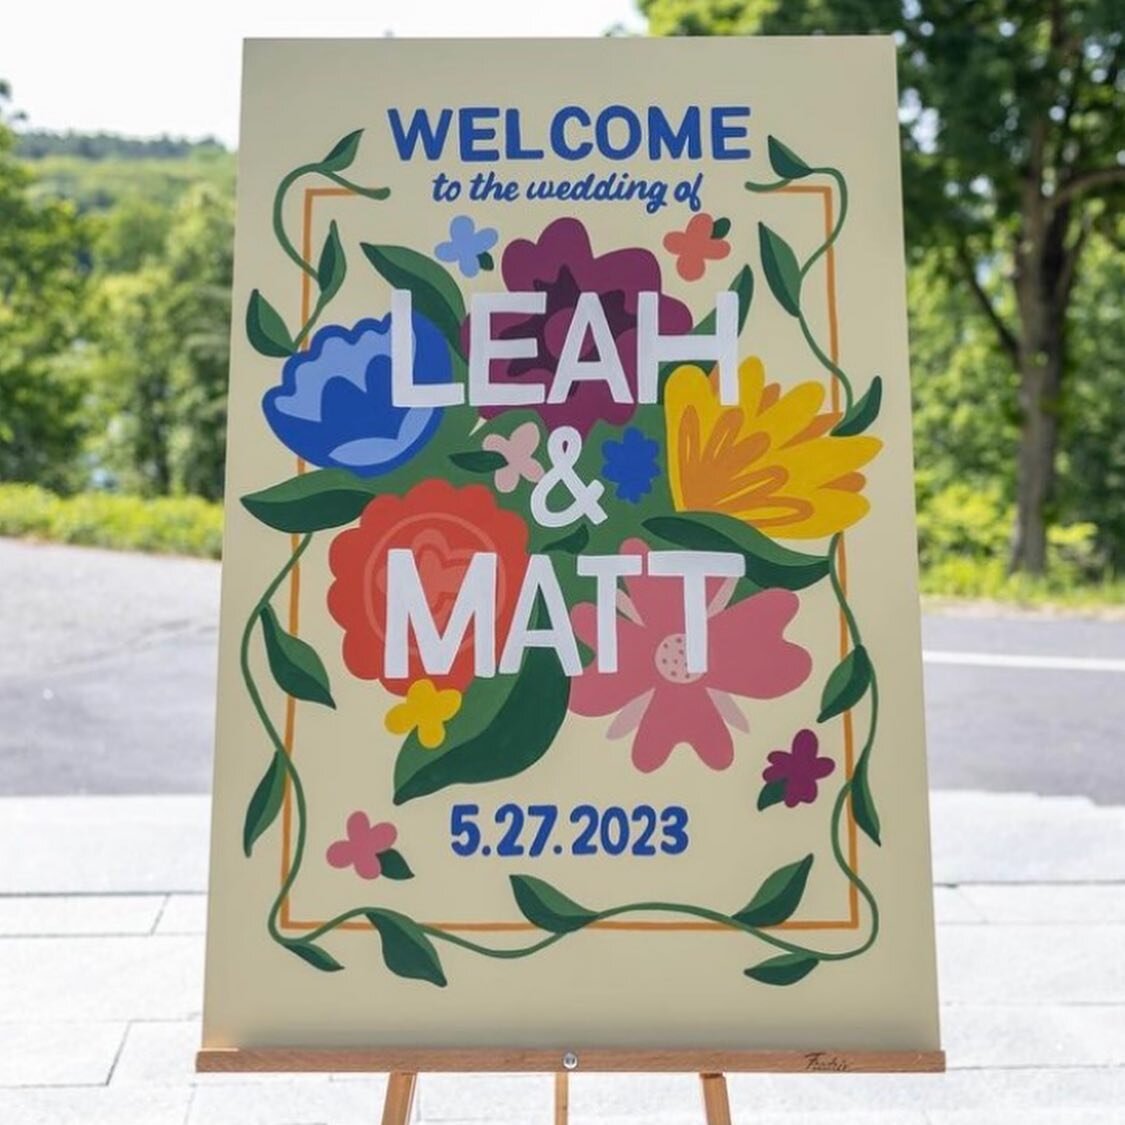 Made some signs for @leahhenoch and Matt for their wedding! I had so much fun designing &amp; painting them. @resinbyleah also made the table placements! Congrats to Leah &amp; Matt!